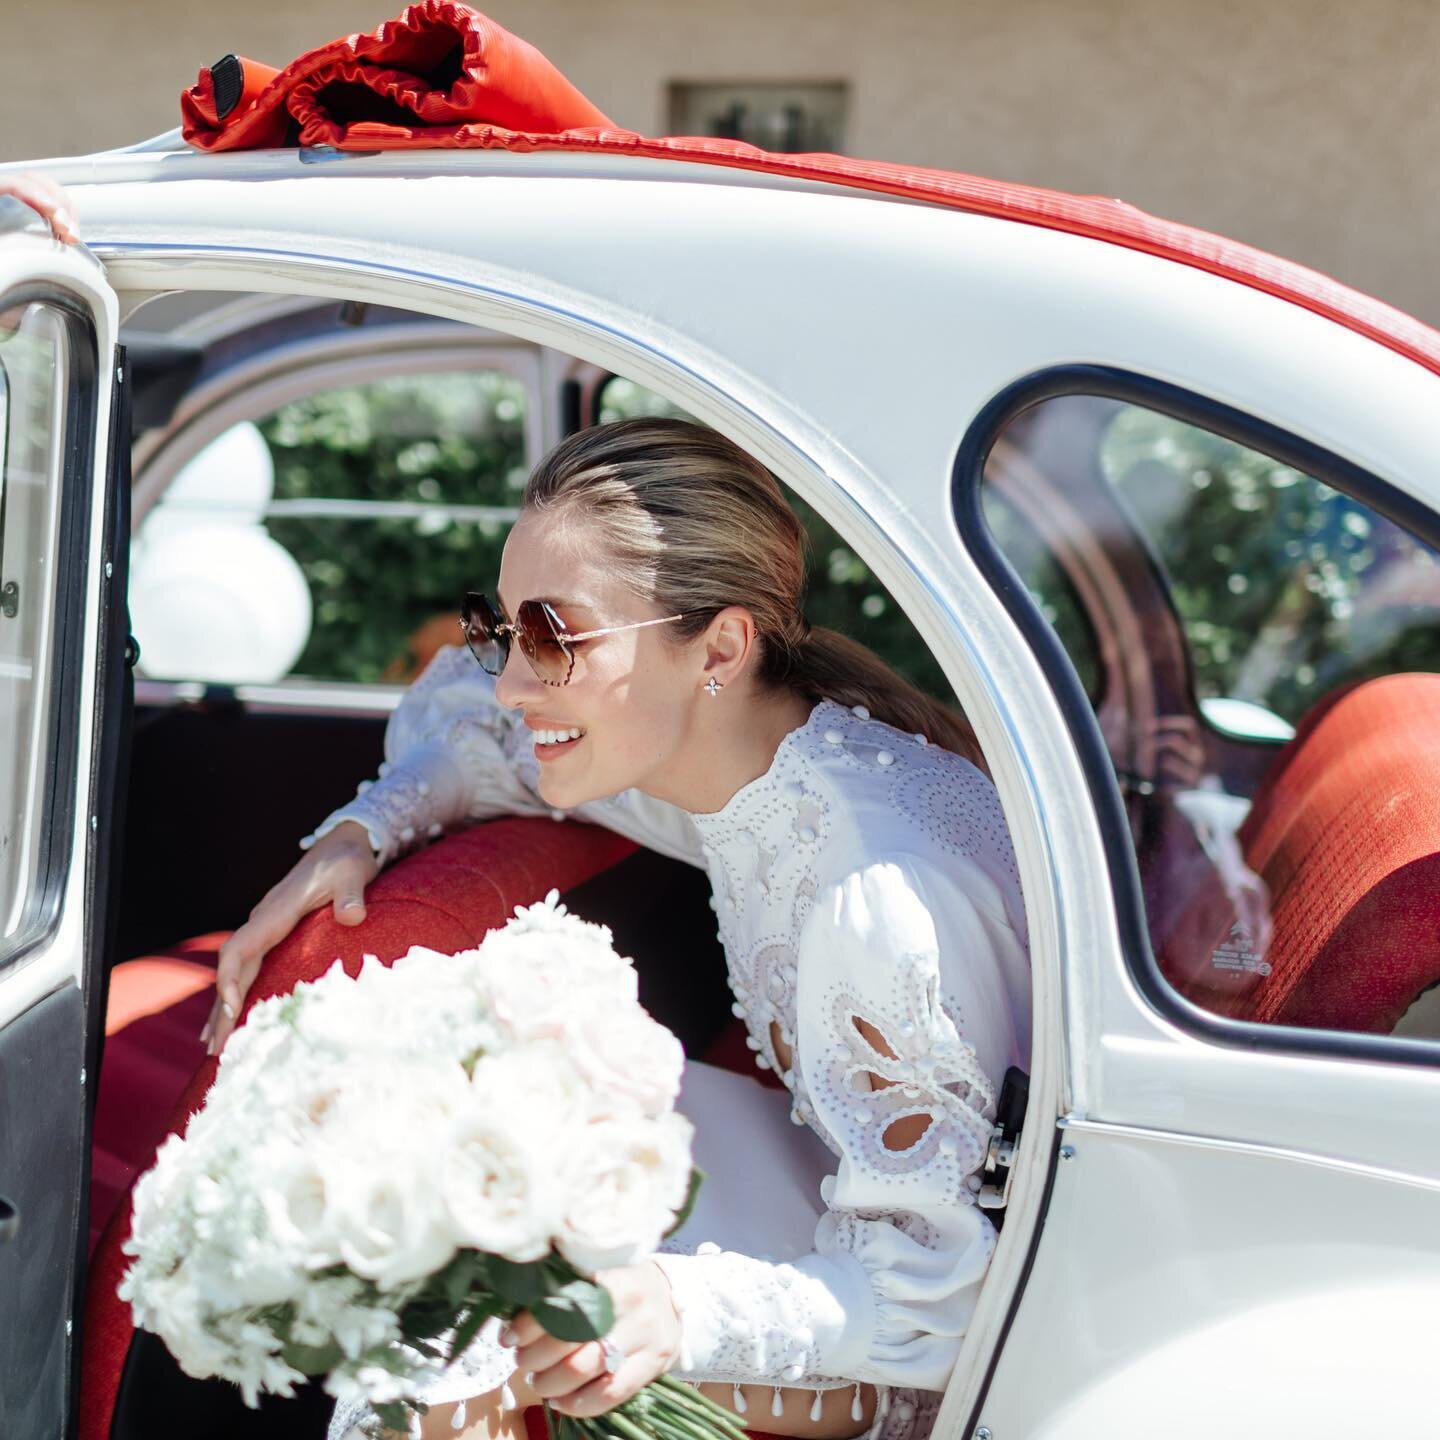 Our #lucytillbride @yasminbaildon stepping out of the most adorable French vintage car to get married in @zimmermann in Saint Tropez!

Featured @bazaaraustralia 

Stay tuned for a a reveal of our latest Saint Tropez Shoot @villabelrose coming to IG s